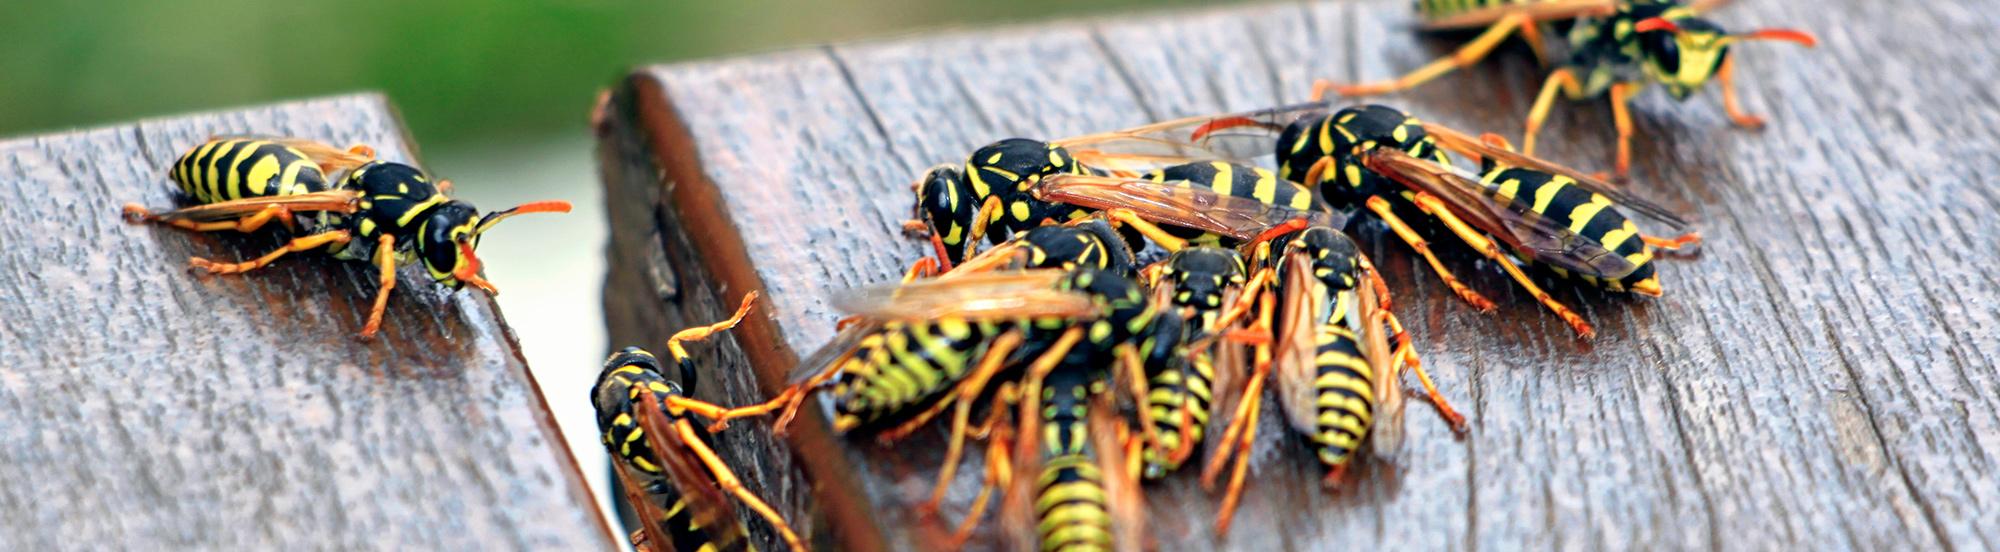 yellow jackets resting on picnic table